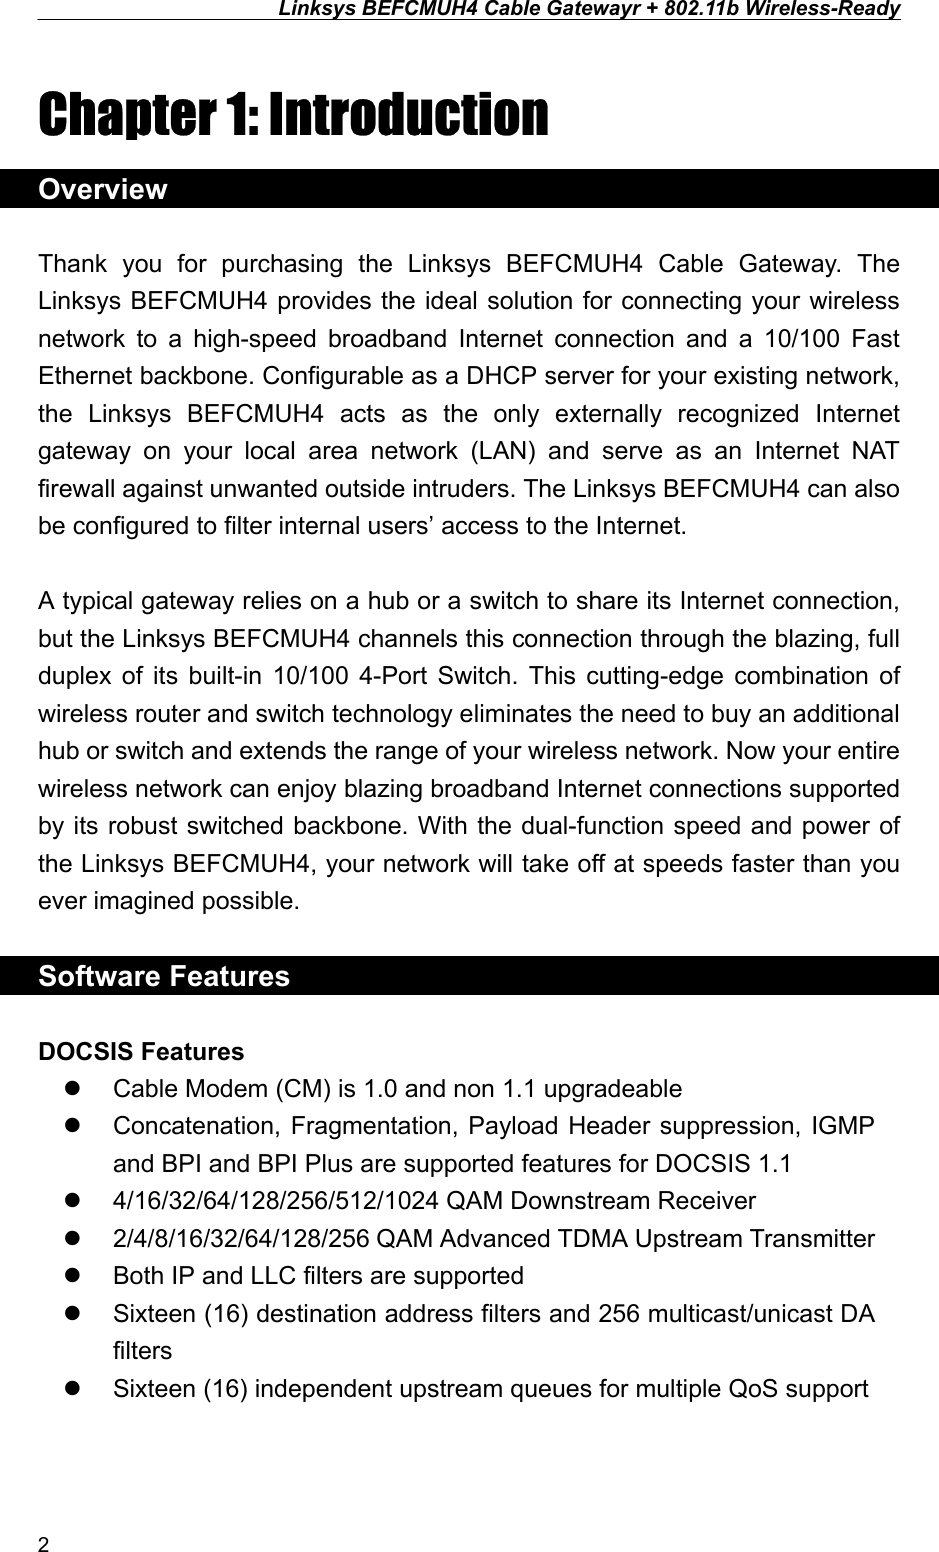 Linksys BEFCMUH4 Cable Gatewayr + 802.11b Wireless-Ready  Chapter 1: Introduction Overview  Thank you for purchasing the Linksys BEFCMUH4 Cable Gateway. The Linksys BEFCMUH4 provides the ideal solution for connecting your wireless network to a high-speed broadband Internet connection and a 10/100 Fast Ethernet backbone. Configurable as a DHCP server for your existing network, the Linksys BEFCMUH4 acts as the only externally recognized Internet gateway on your local area network (LAN) and serve as an Internet NAT firewall against unwanted outside intruders. The Linksys BEFCMUH4 can also be configured to filter internal users’ access to the Internet.  A typical gateway relies on a hub or a switch to share its Internet connection, but the Linksys BEFCMUH4 channels this connection through the blazing, full duplex of its built-in 10/100 4-Port Switch. This cutting-edge combination of wireless router and switch technology eliminates the need to buy an additional hub or switch and extends the range of your wireless network. Now your entire wireless network can enjoy blazing broadband Internet connections supported by its robust switched backbone. With the dual-function speed and power of the Linksys BEFCMUH4, your network will take off at speeds faster than you ever imagined possible.  Software Features  DOCSIS Features   Cable Modem (CM) is 1.0 and non 1.1 upgradeable   Concatenation, Fragmentation, Payload Header suppression, IGMP and BPI and BPI Plus are supported features for DOCSIS 1.1   4/16/32/64/128/256/512/1024 QAM Downstream Receiver     2/4/8/16/32/64/128/256 QAM Advanced TDMA Upstream Transmitter   Both IP and LLC filters are supported   Sixteen (16) destination address filters and 256 multicast/unicast DA filters   Sixteen (16) independent upstream queues for multiple QoS support  2 